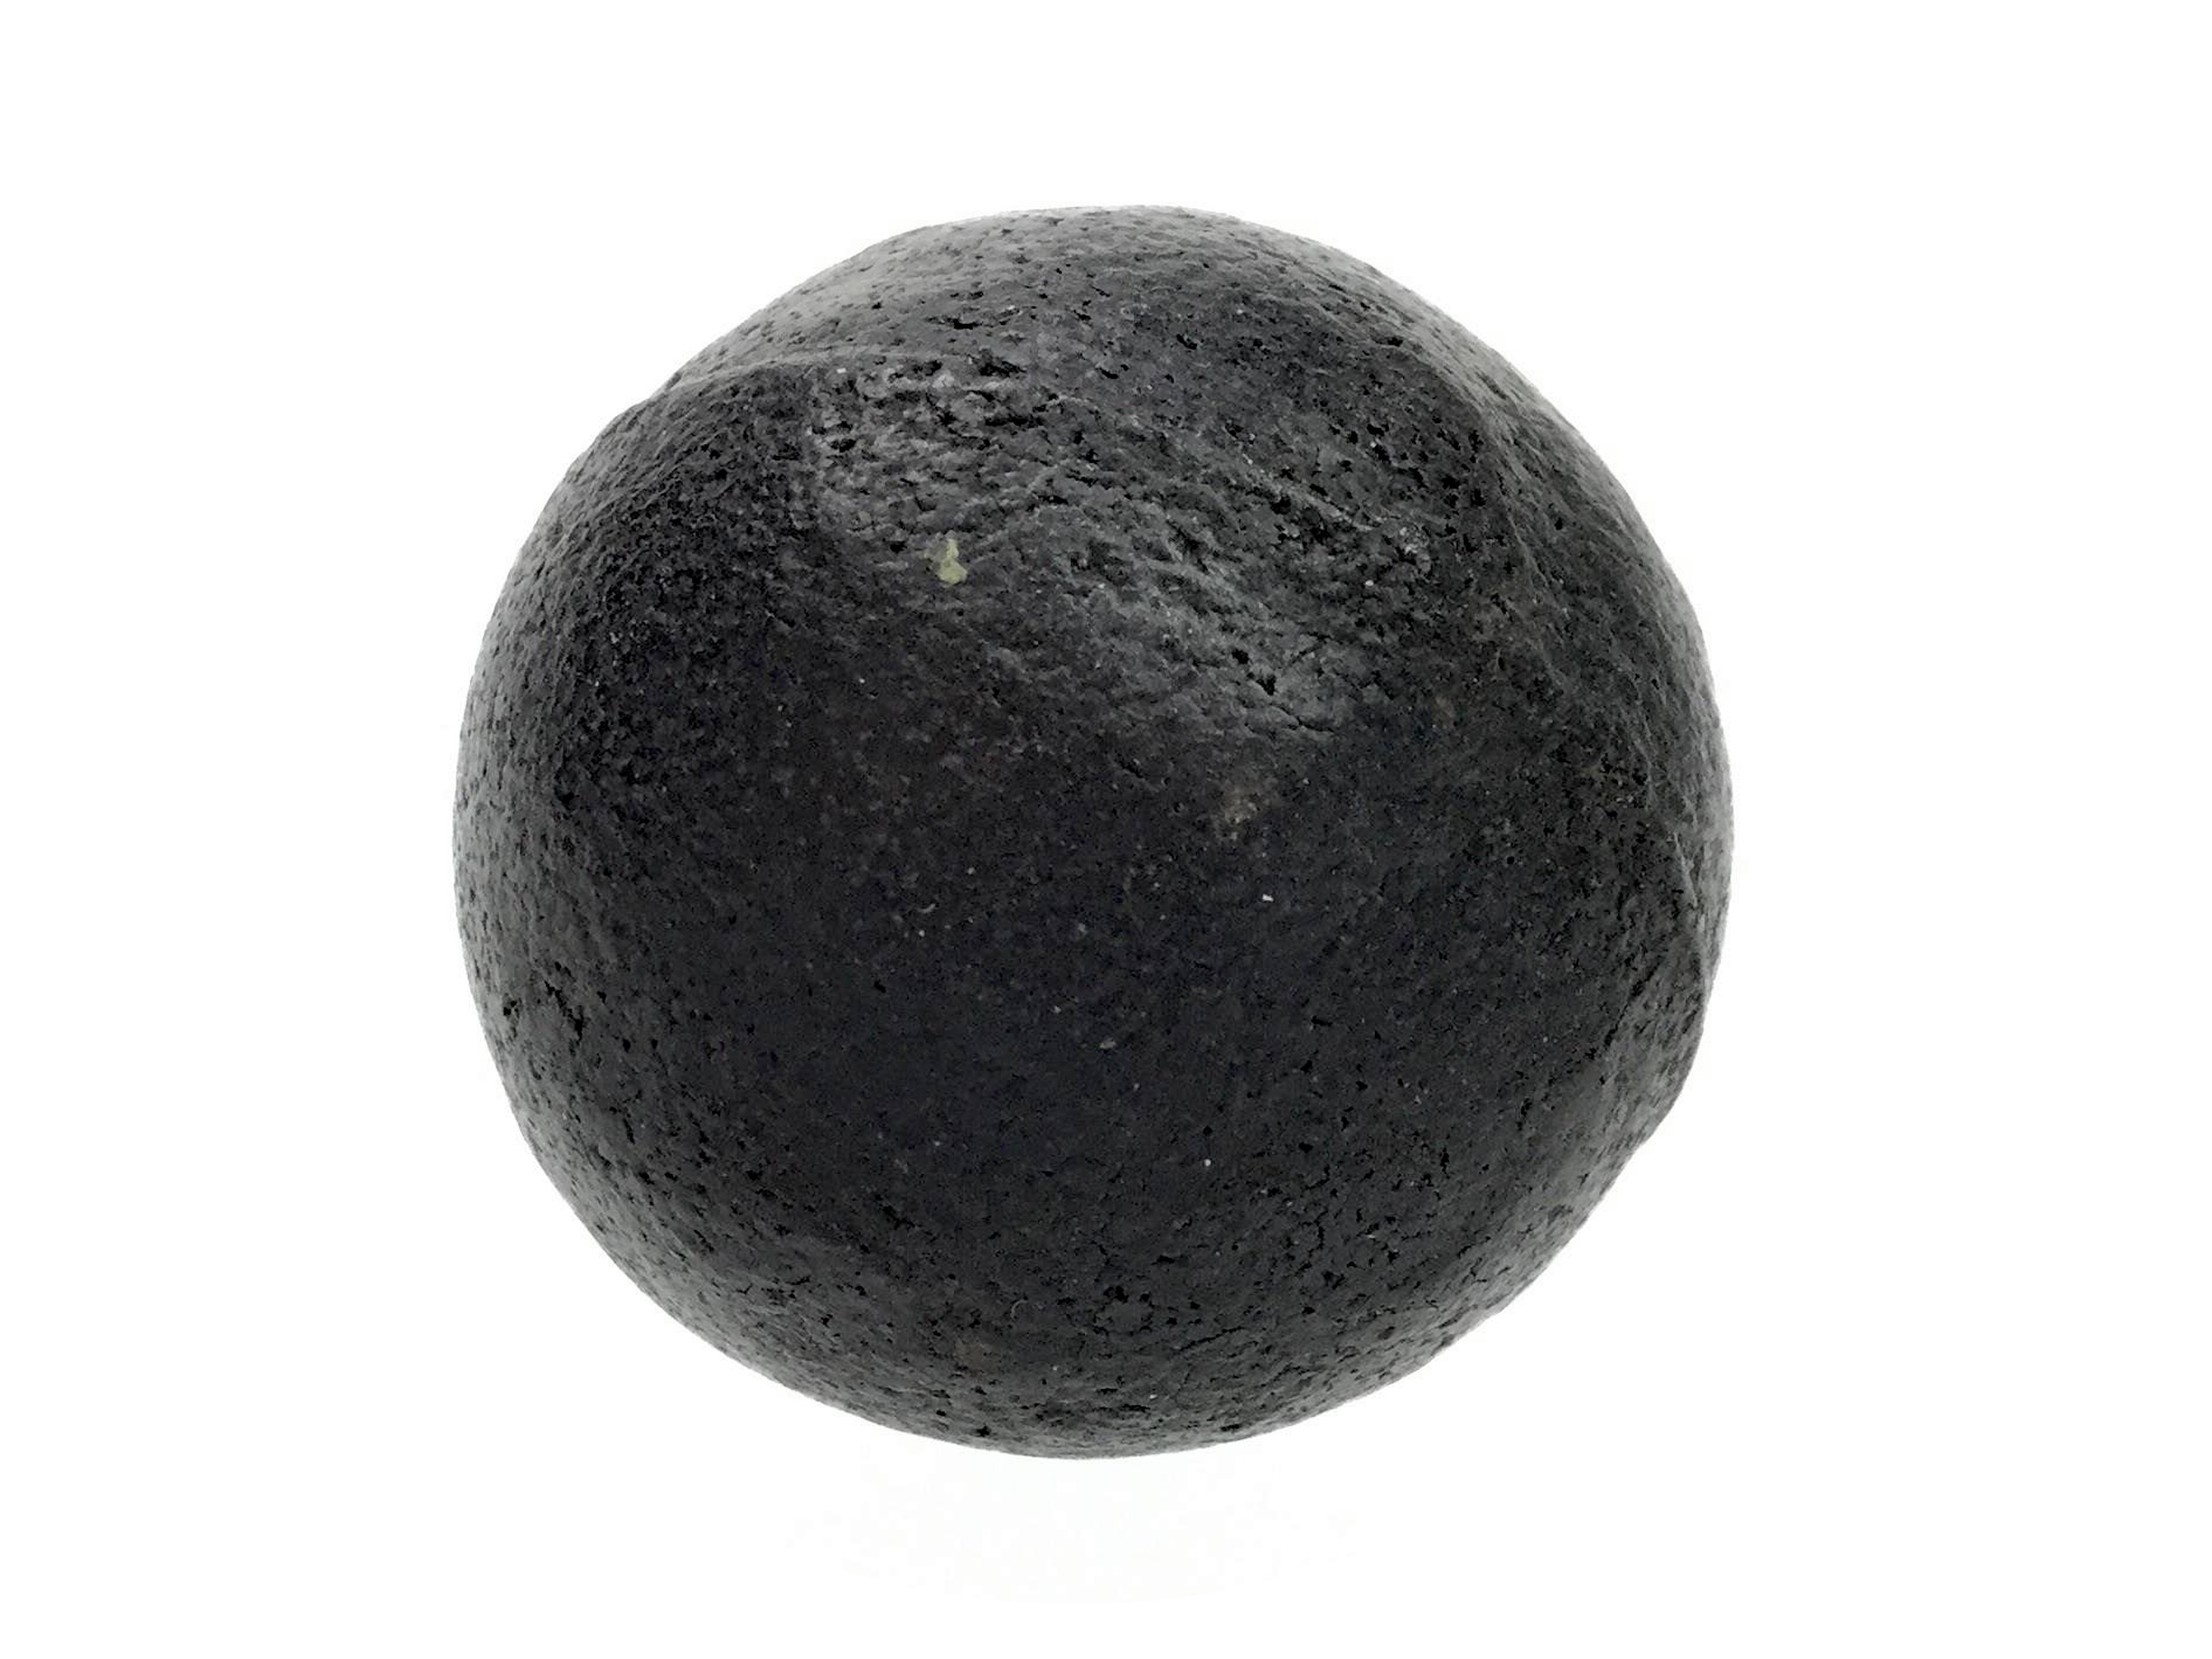 A LATE 19TH/EARLY 20TH CENTURY WOODEN GOLF BALL